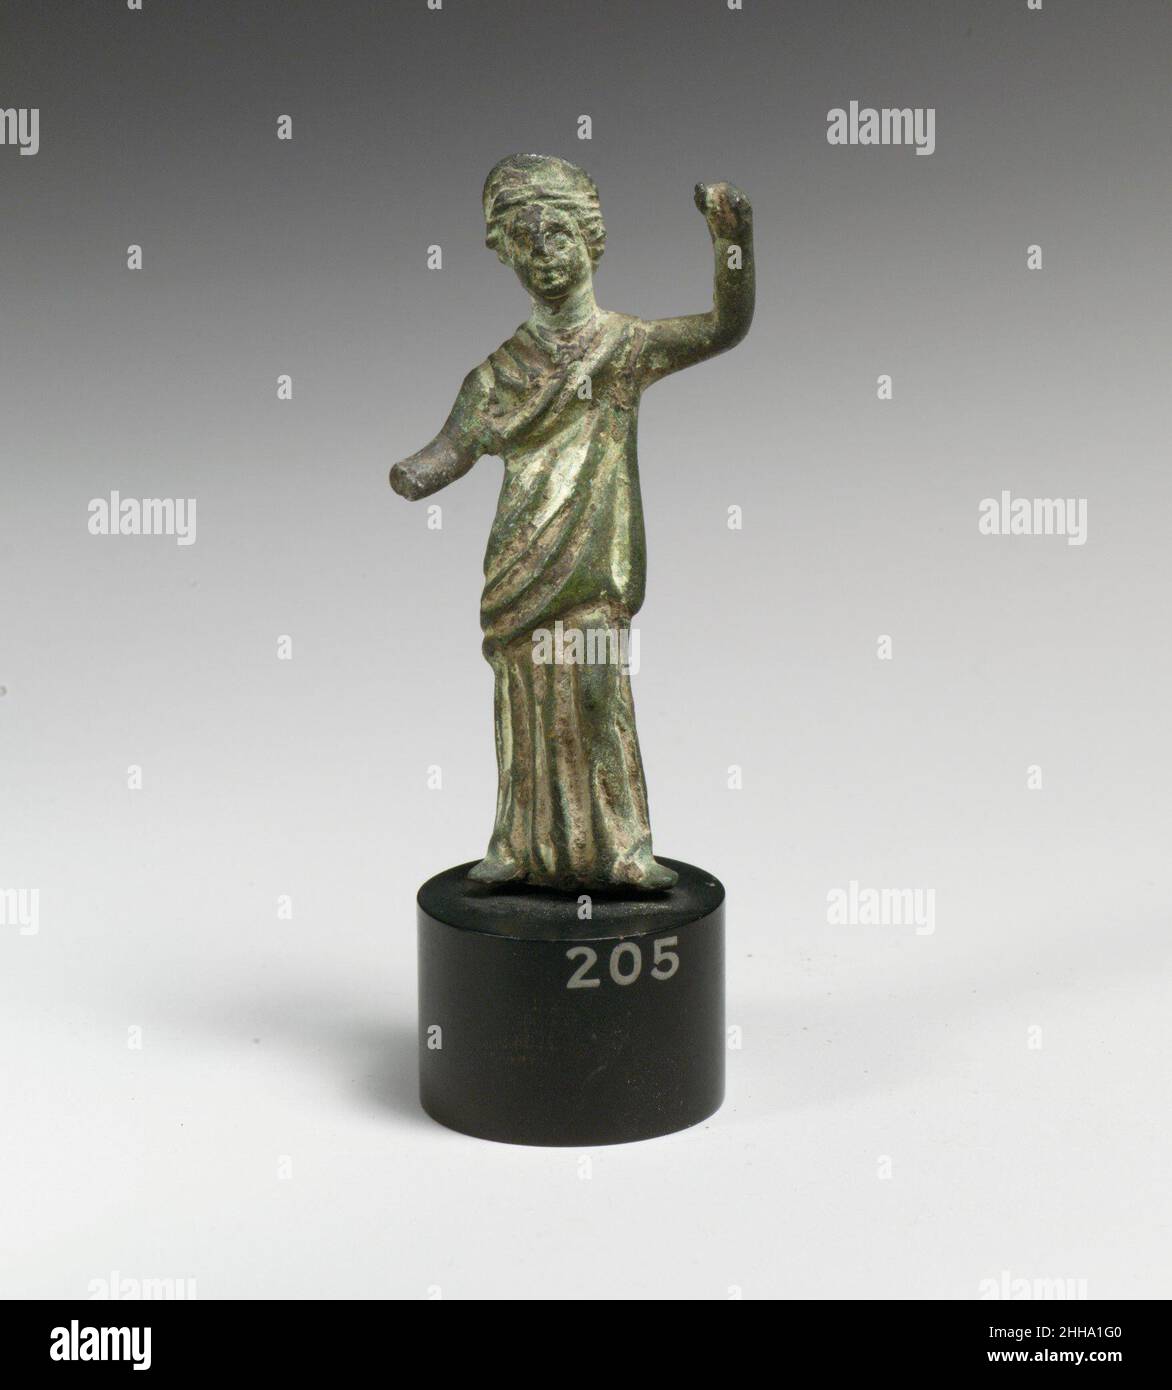 Bronze statuette of a goddess 1st–2nd century A.D. Roman The Roman goddess Juno is likely represented.. Bronze statuette of a goddess  246398 Stock Photo